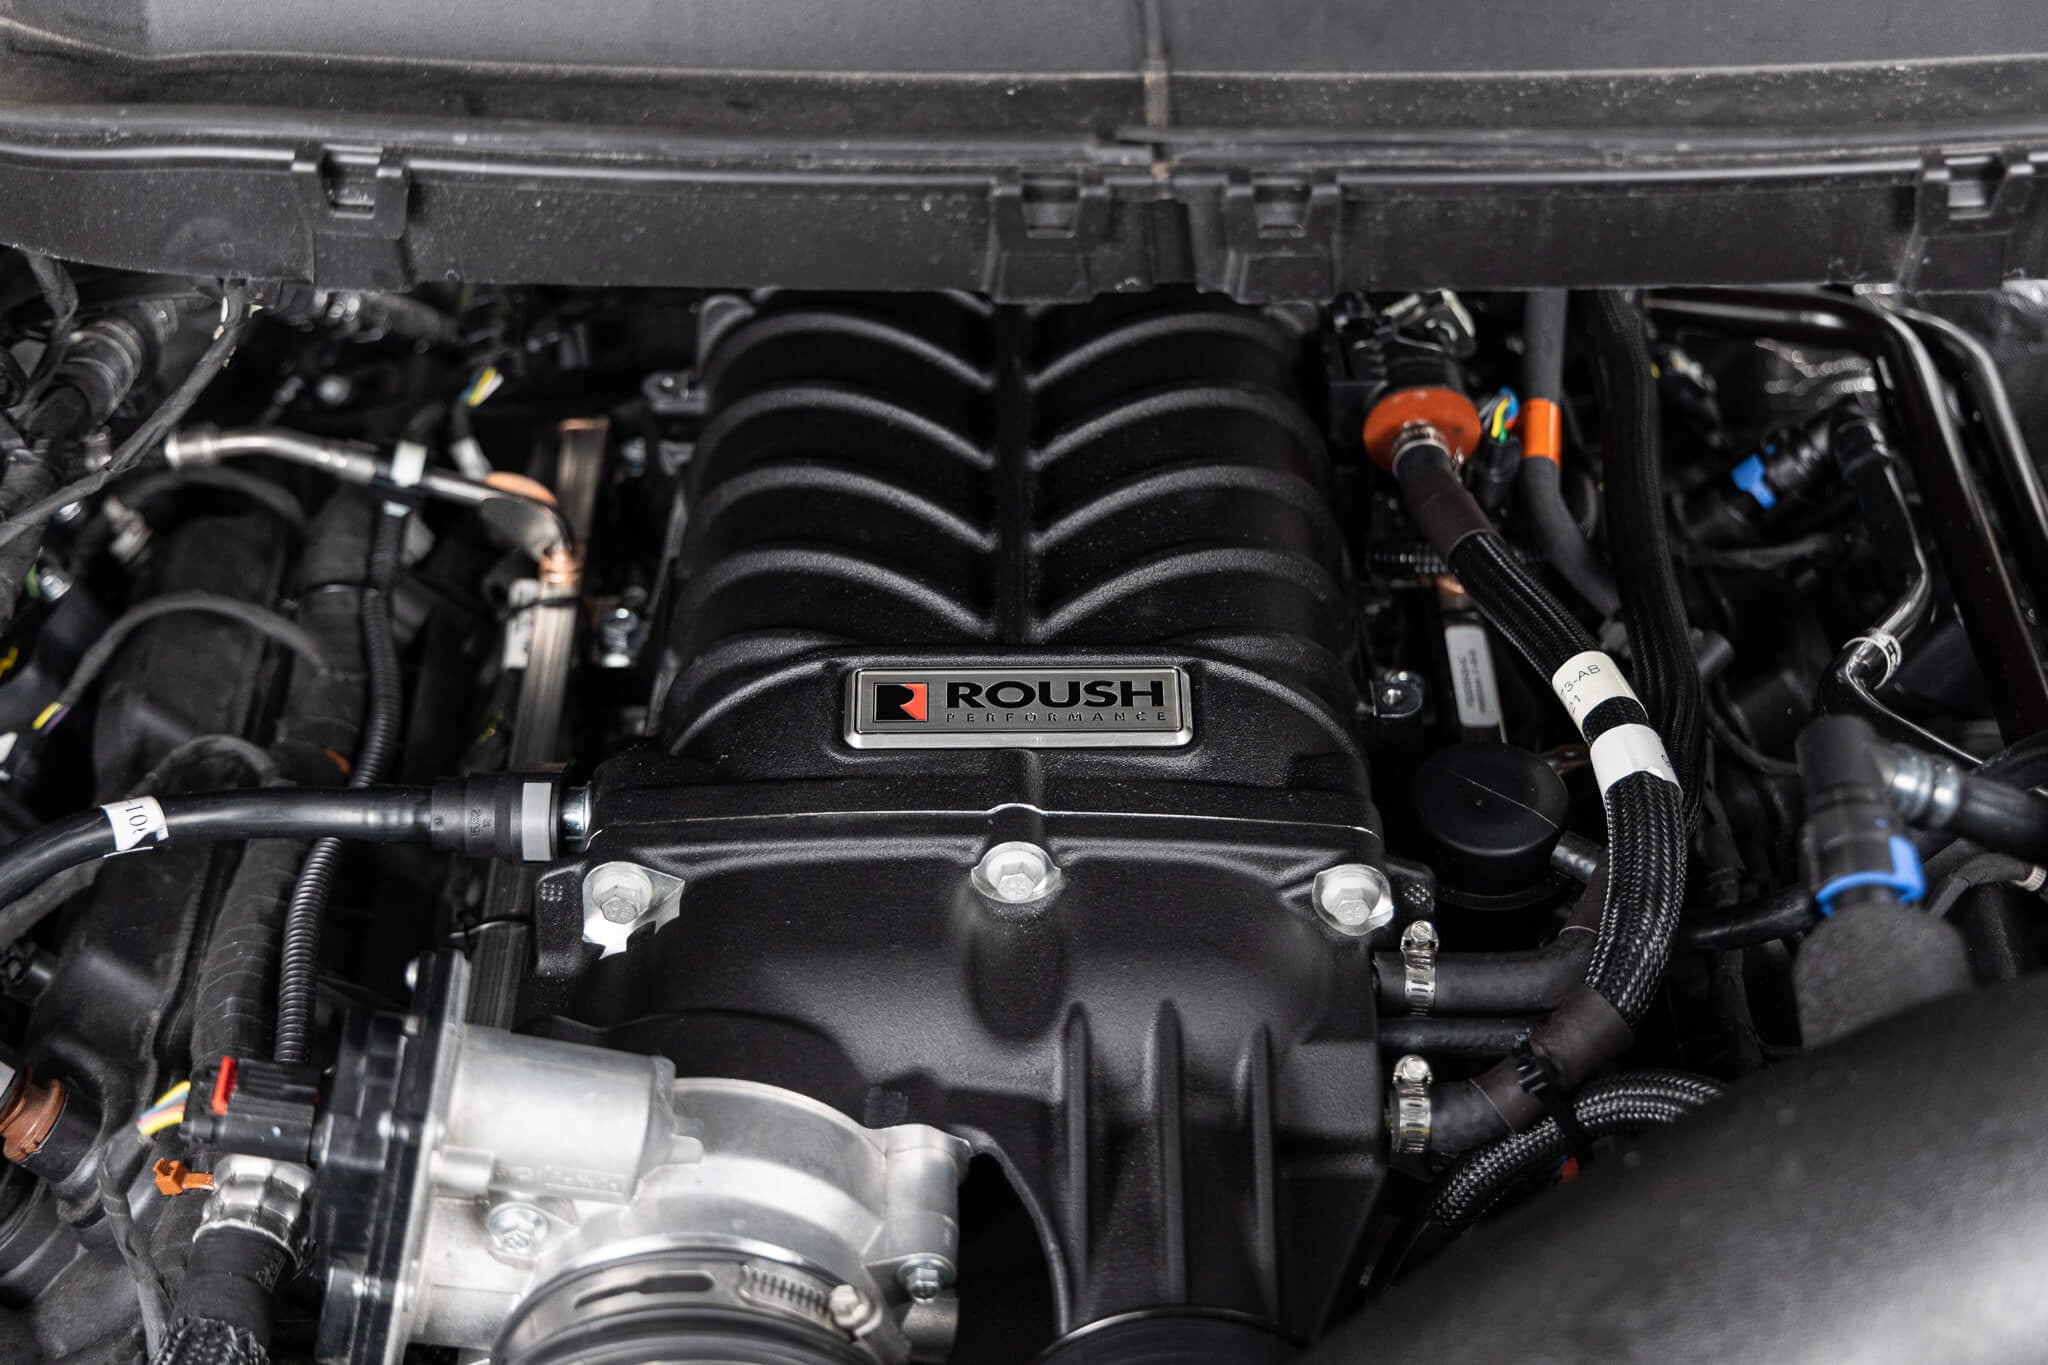 2021-2023 Roush F-150 Supercharger Kit (Pro Power Onboard)